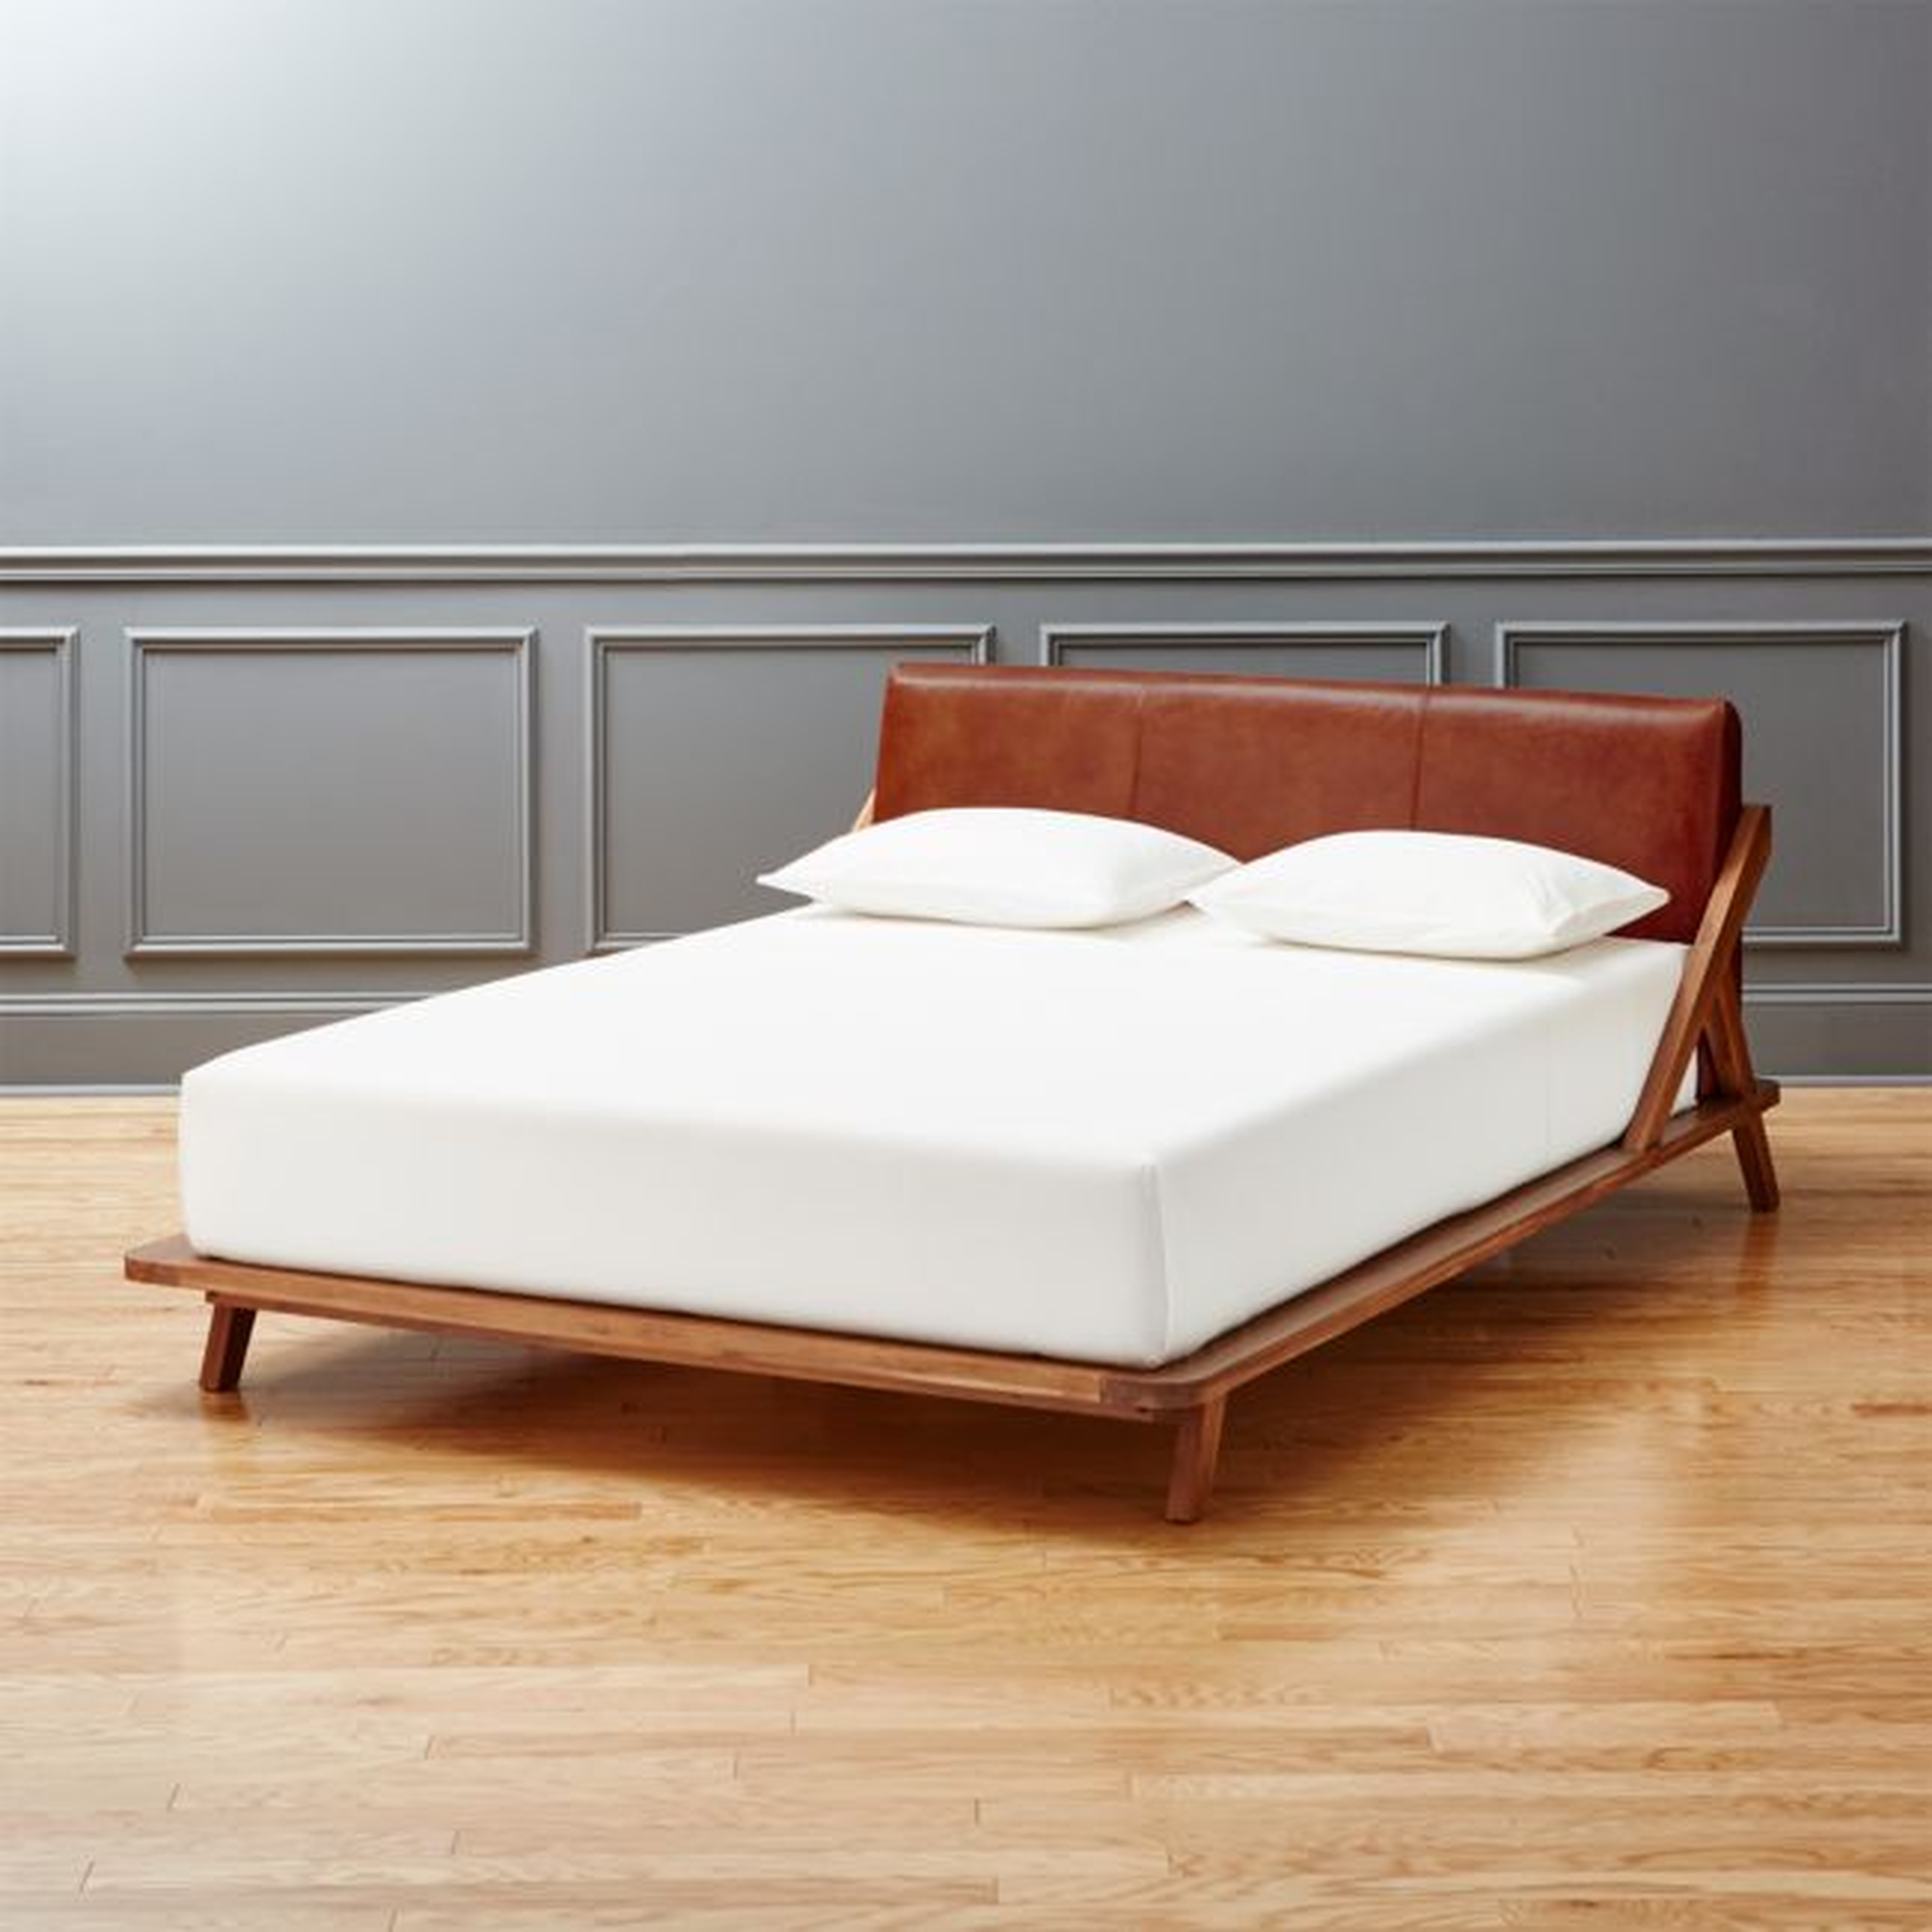 Drommen Acacia Queen Bed with Leather Headboard - CB2